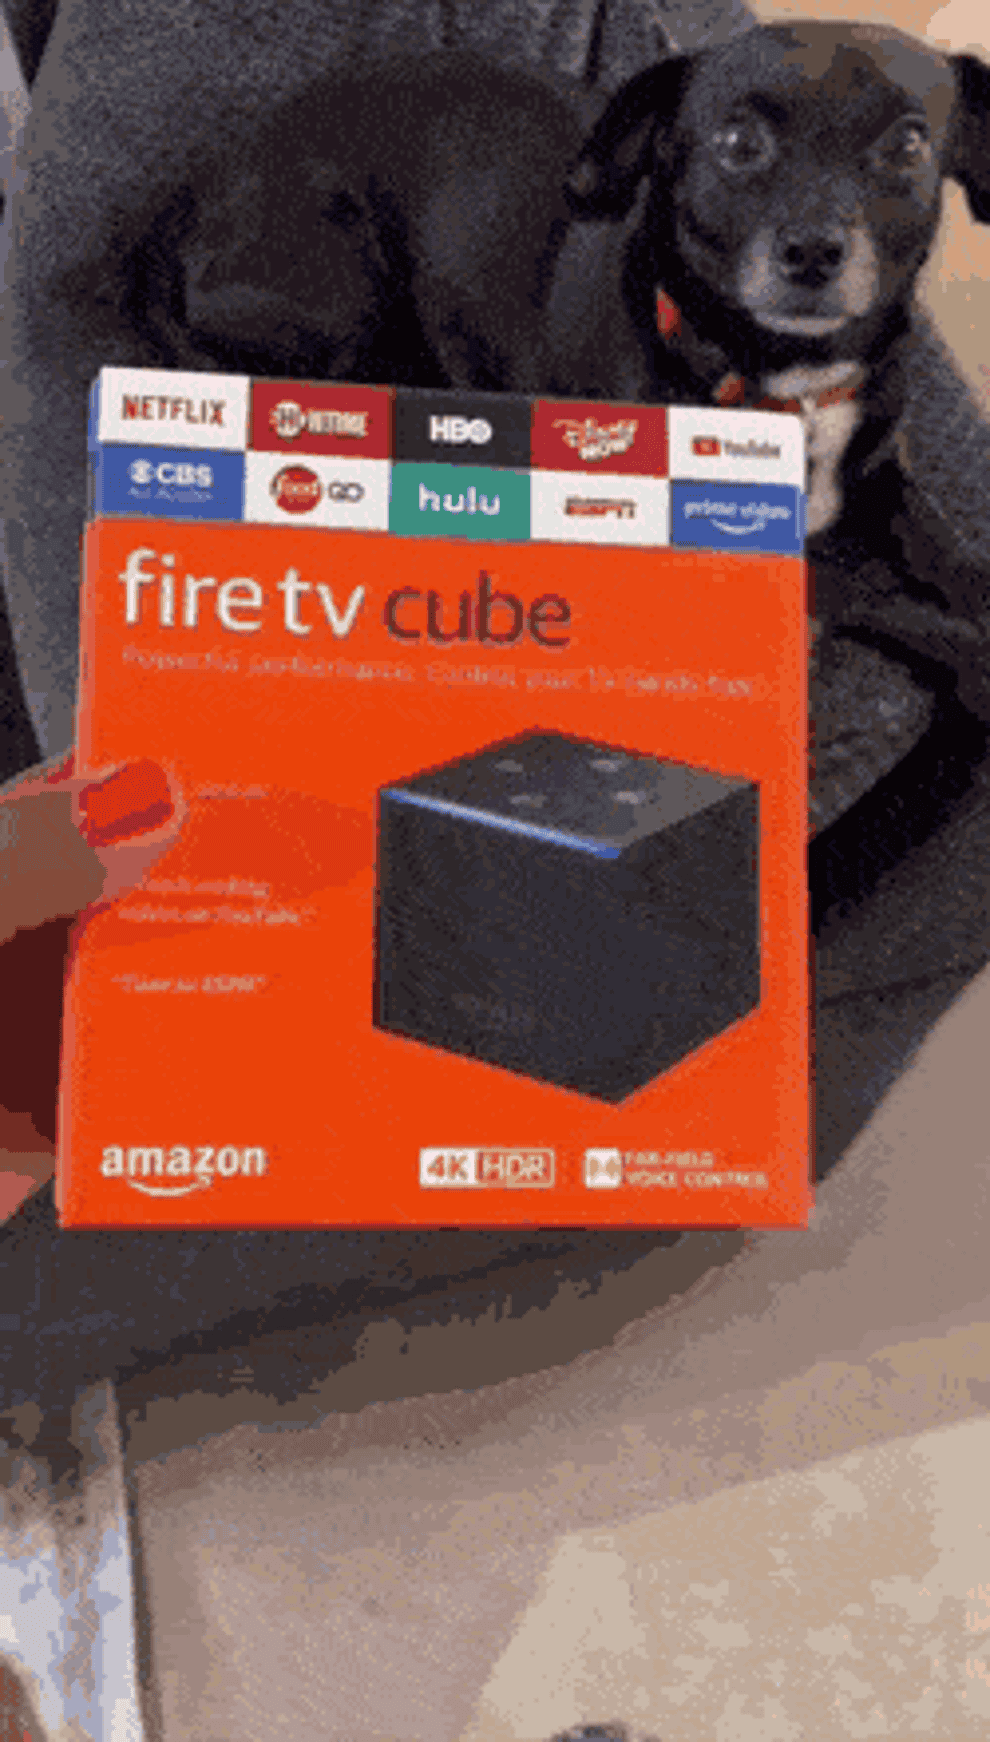 A gif of the Fire TV Cube.